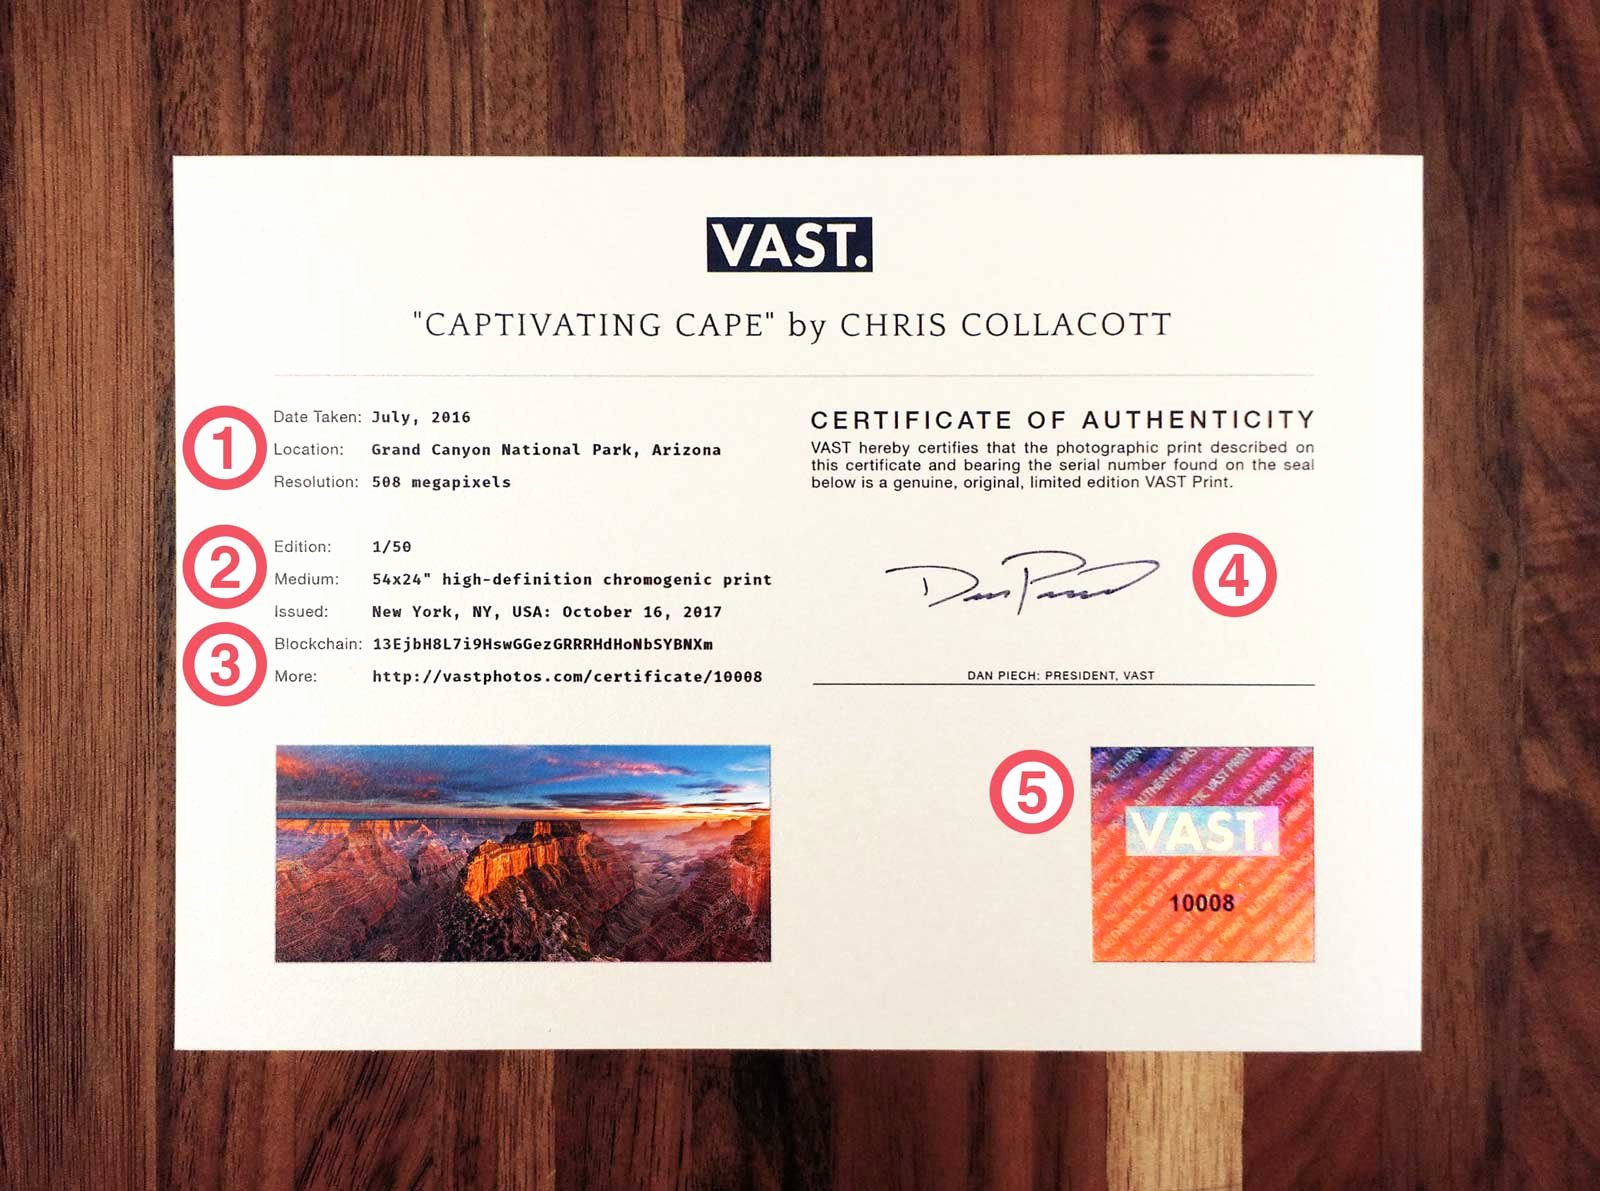 Certificate Of Authenticity Photography Awesome A Look at the Vast Certificate Of Authenticity – Vast Blog